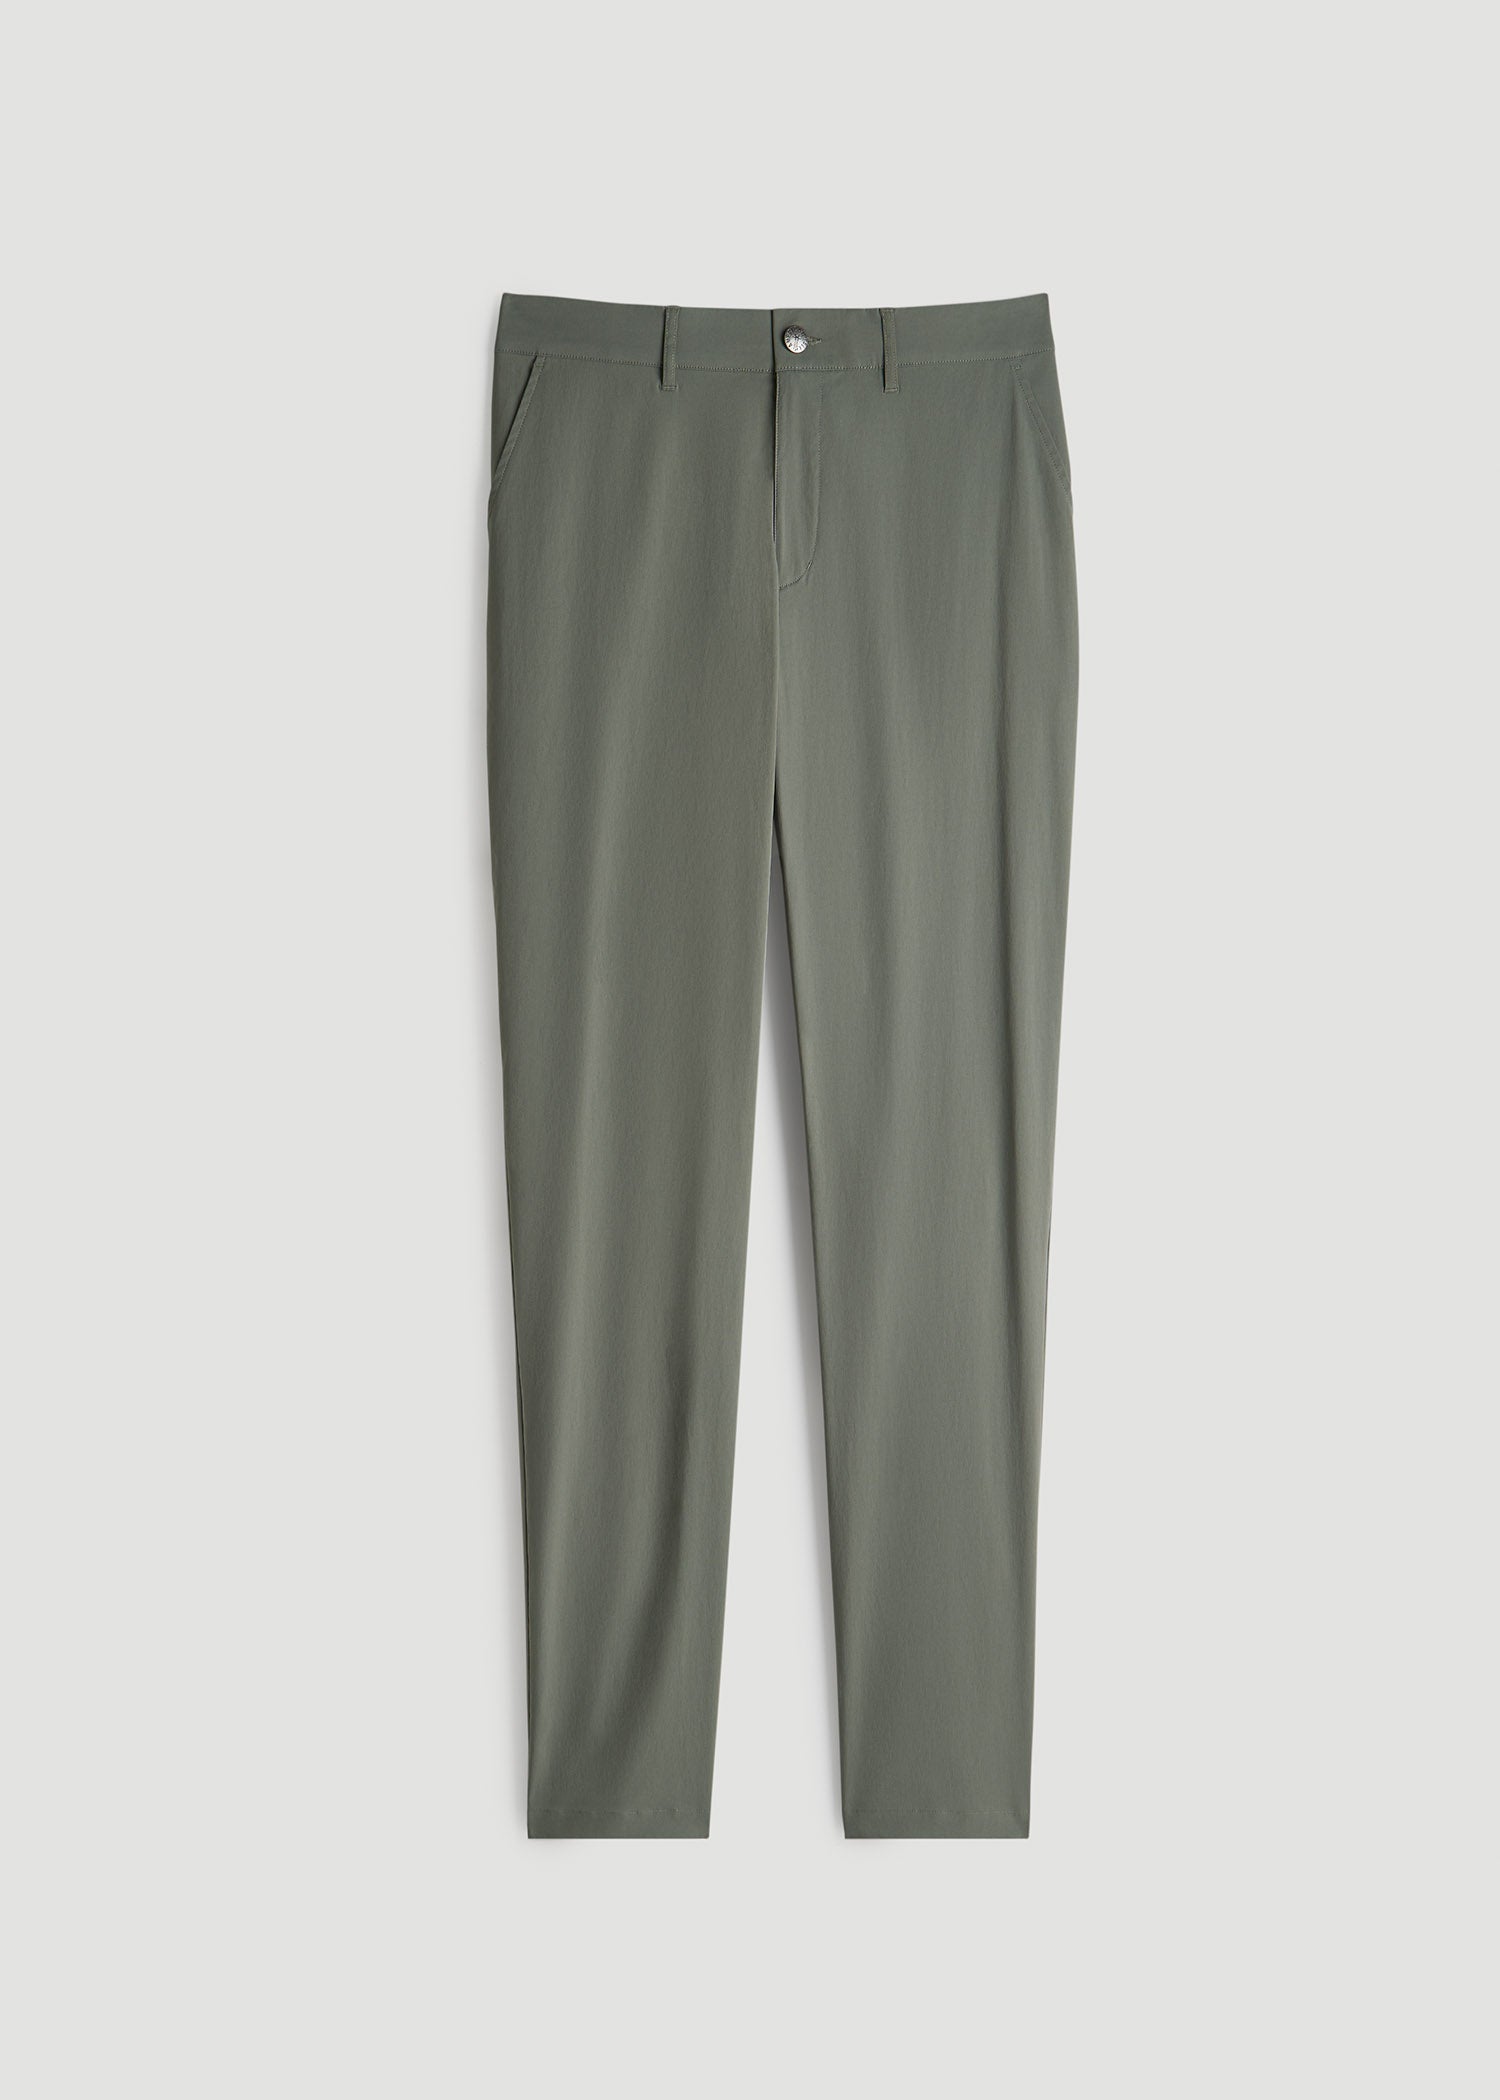 Women Uniqlo DRY-EX Ultra Stretch Active Ankle Pants, Women's